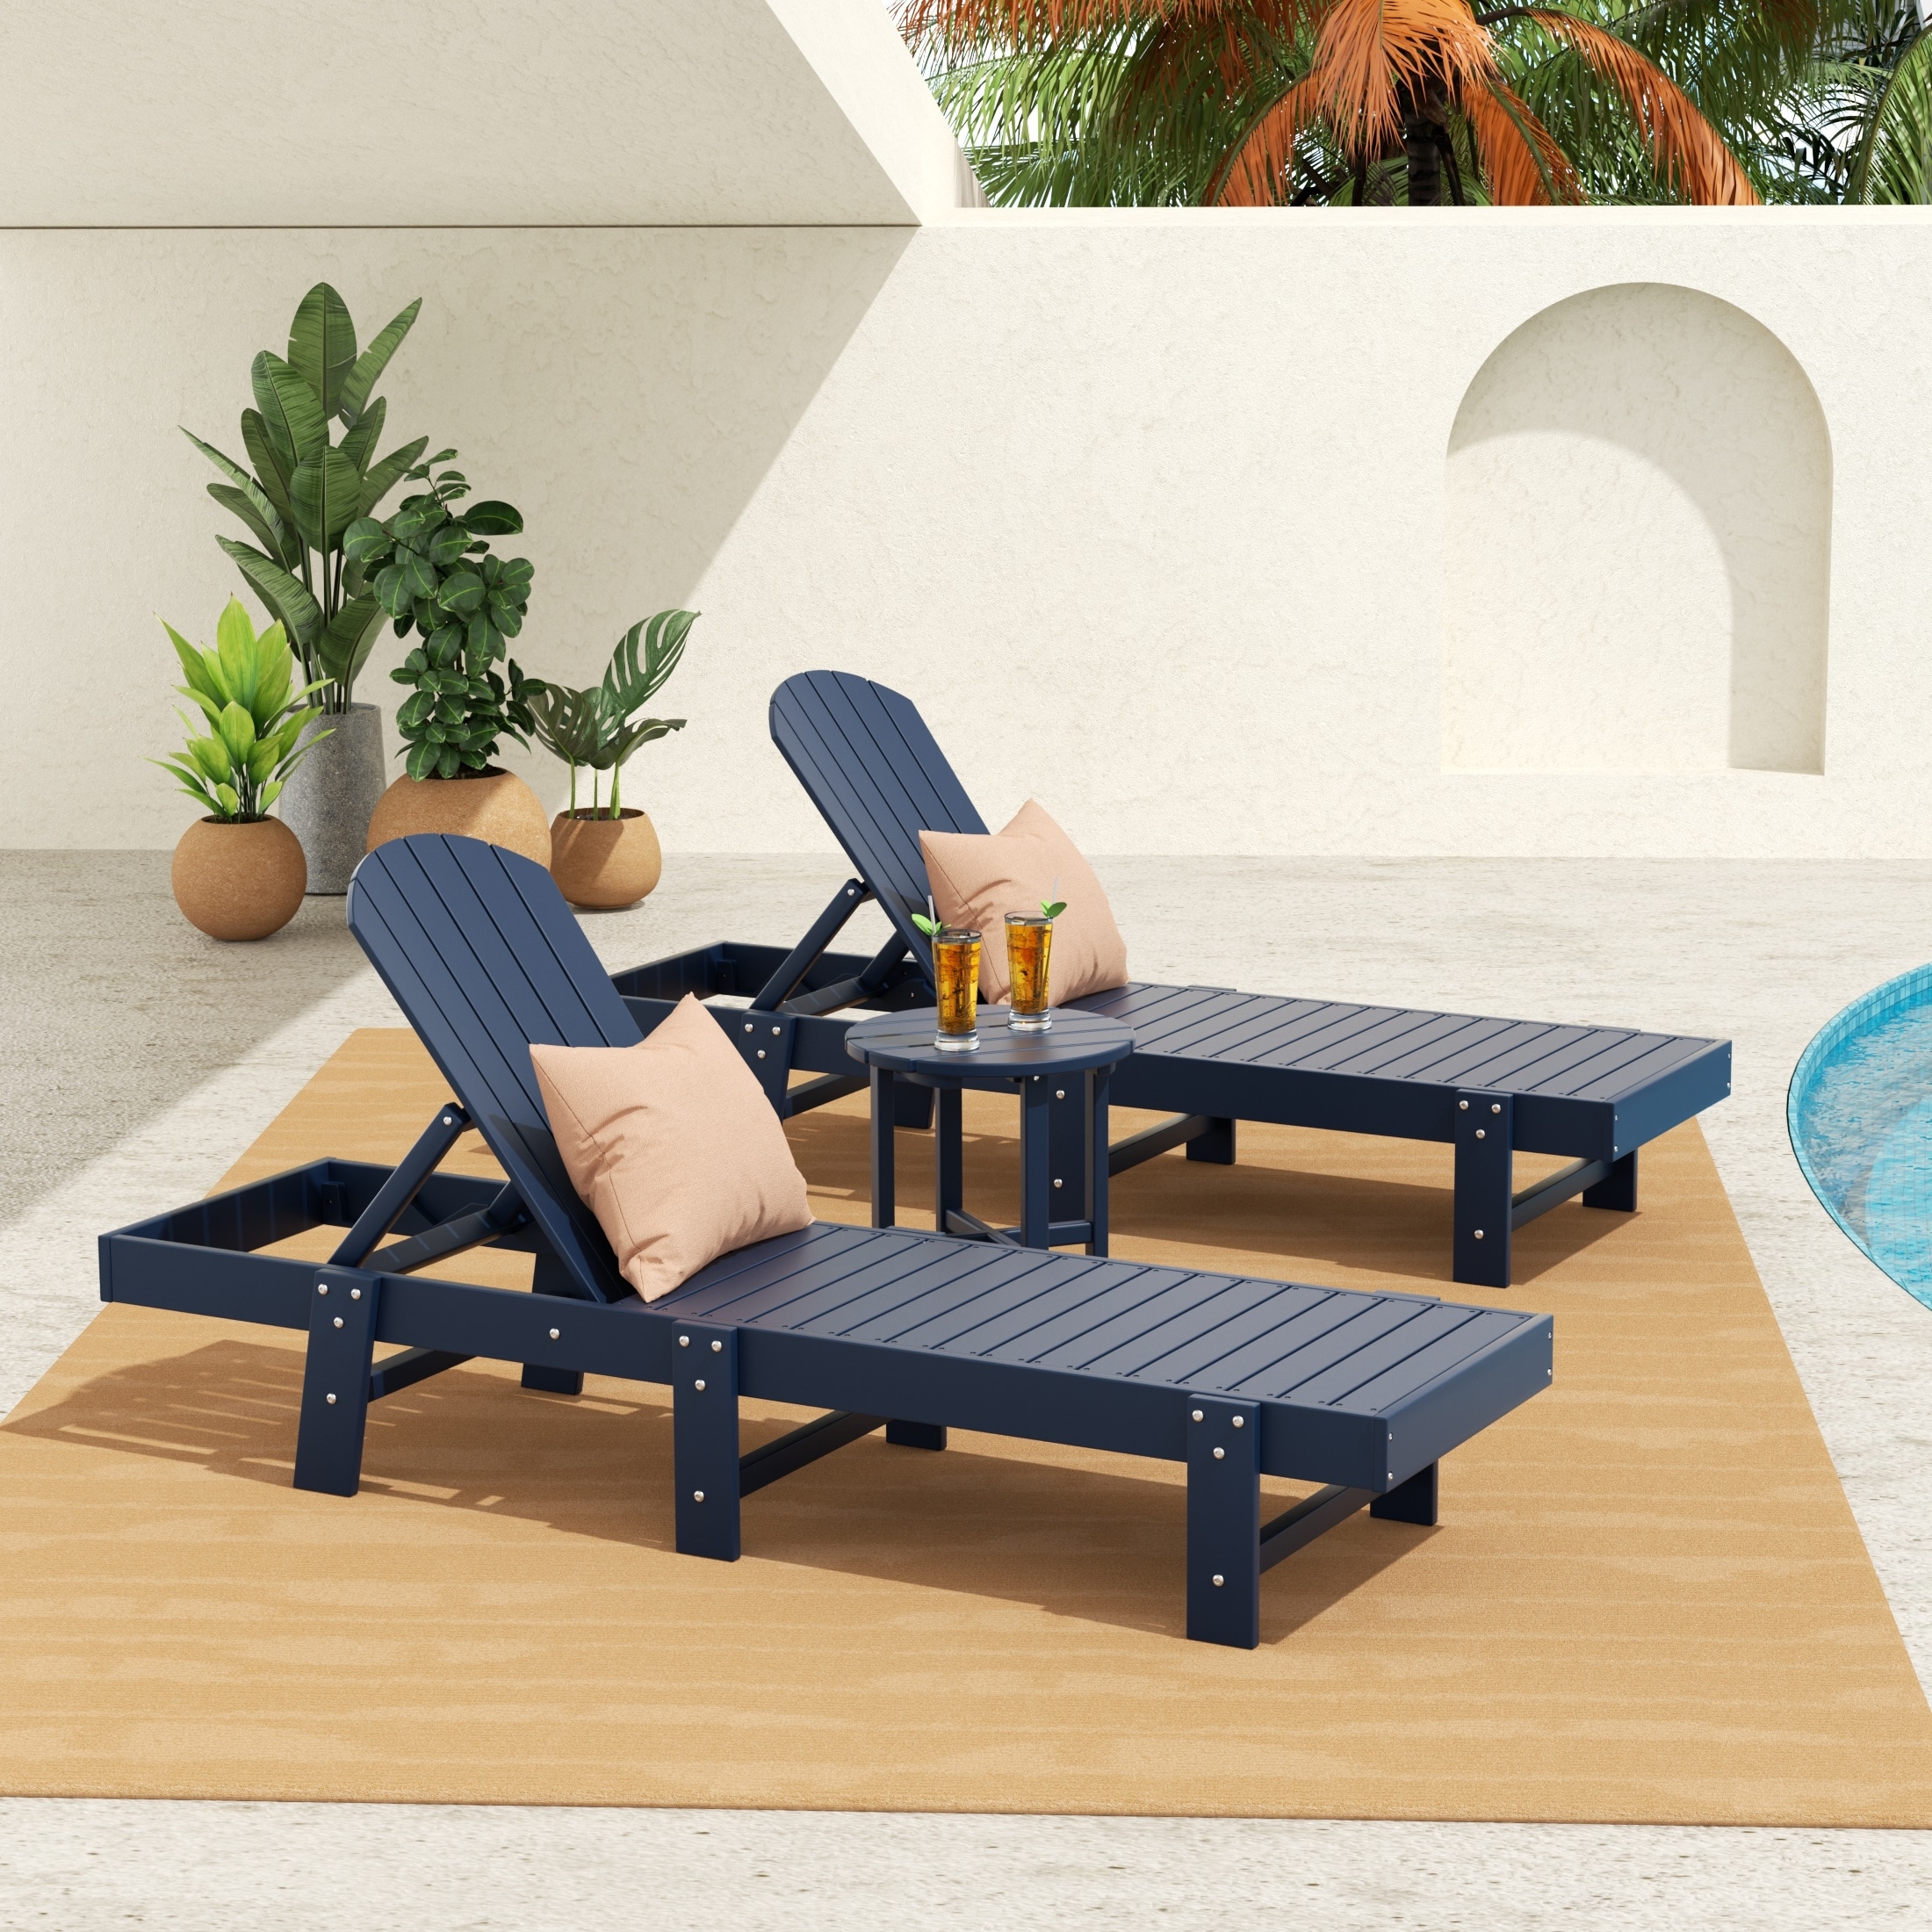 Polytrends Altura Armless Poly Eco-friendly All Weather Reclining Chaise Lounge With Side Table Set (3-piece Set)